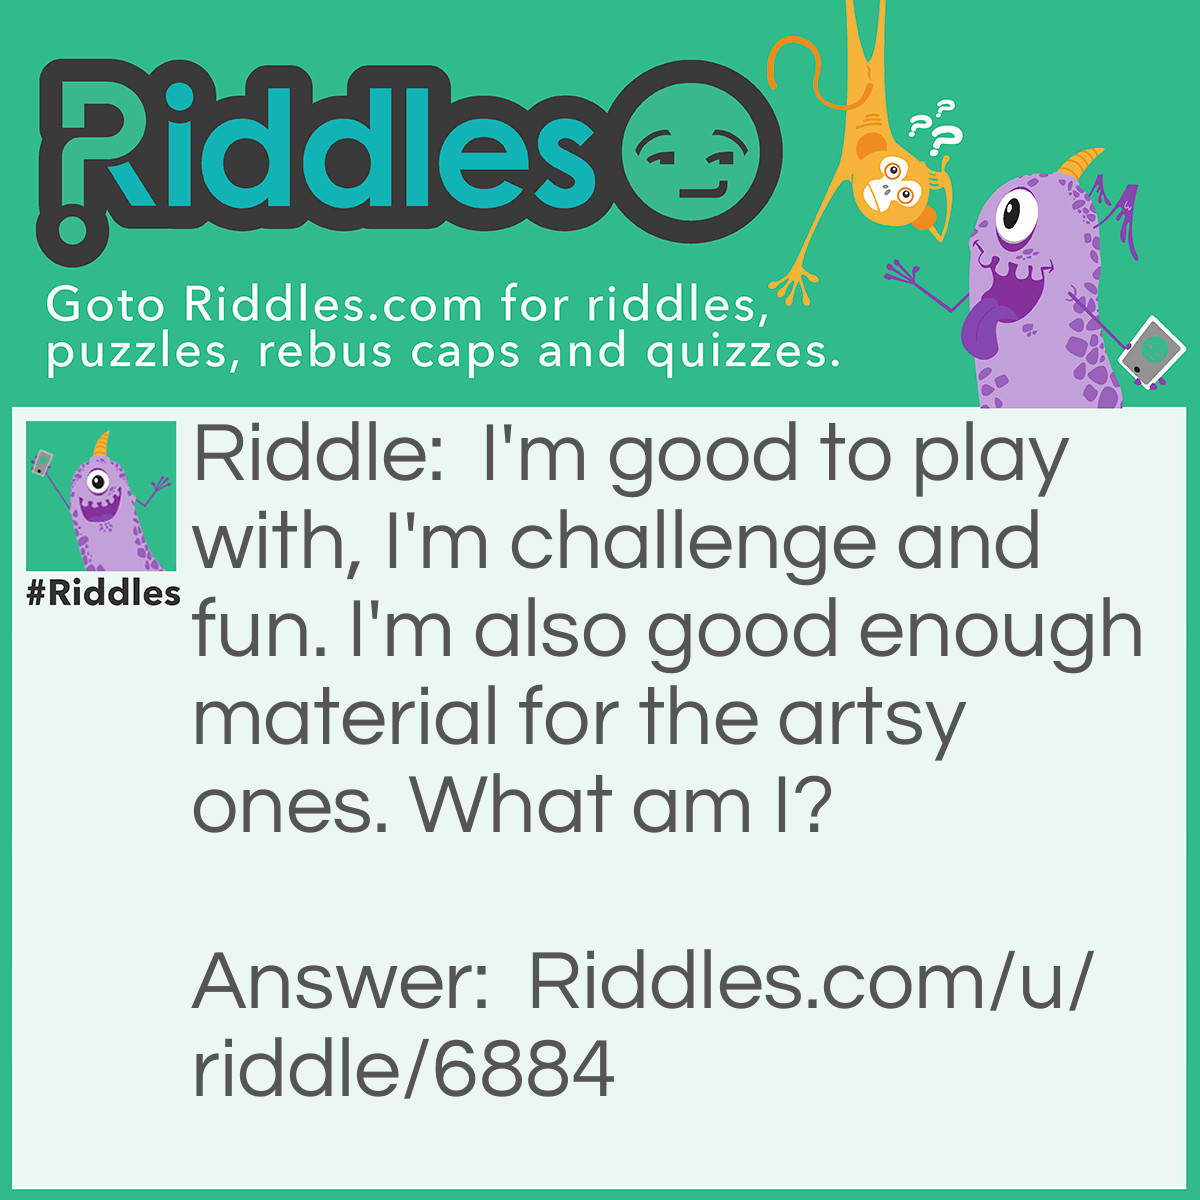 Riddle: I'm good to play with, I'm challenge and fun. I'm also good enough material for the artsy ones. What am I? Answer: Card(s).